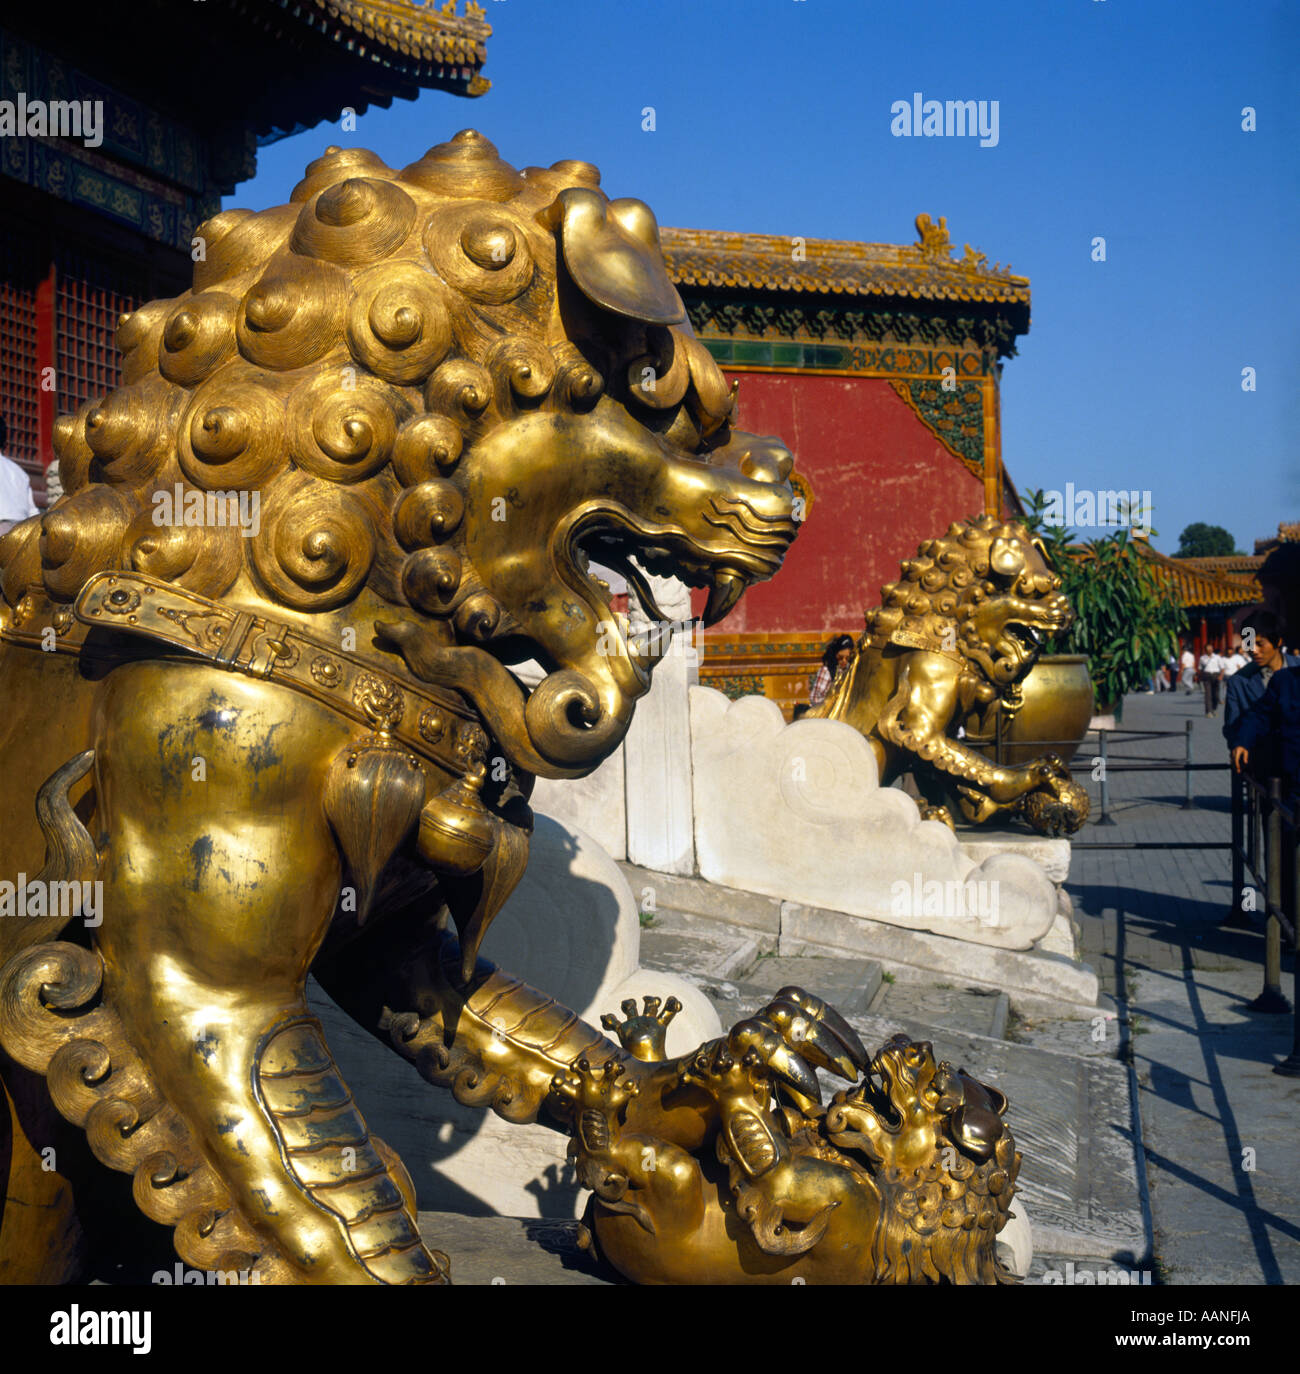 Detail and close-up of magnificent metal rampant oriental golden dragon statues in the Forbidden City in Beijing China Stock Photo